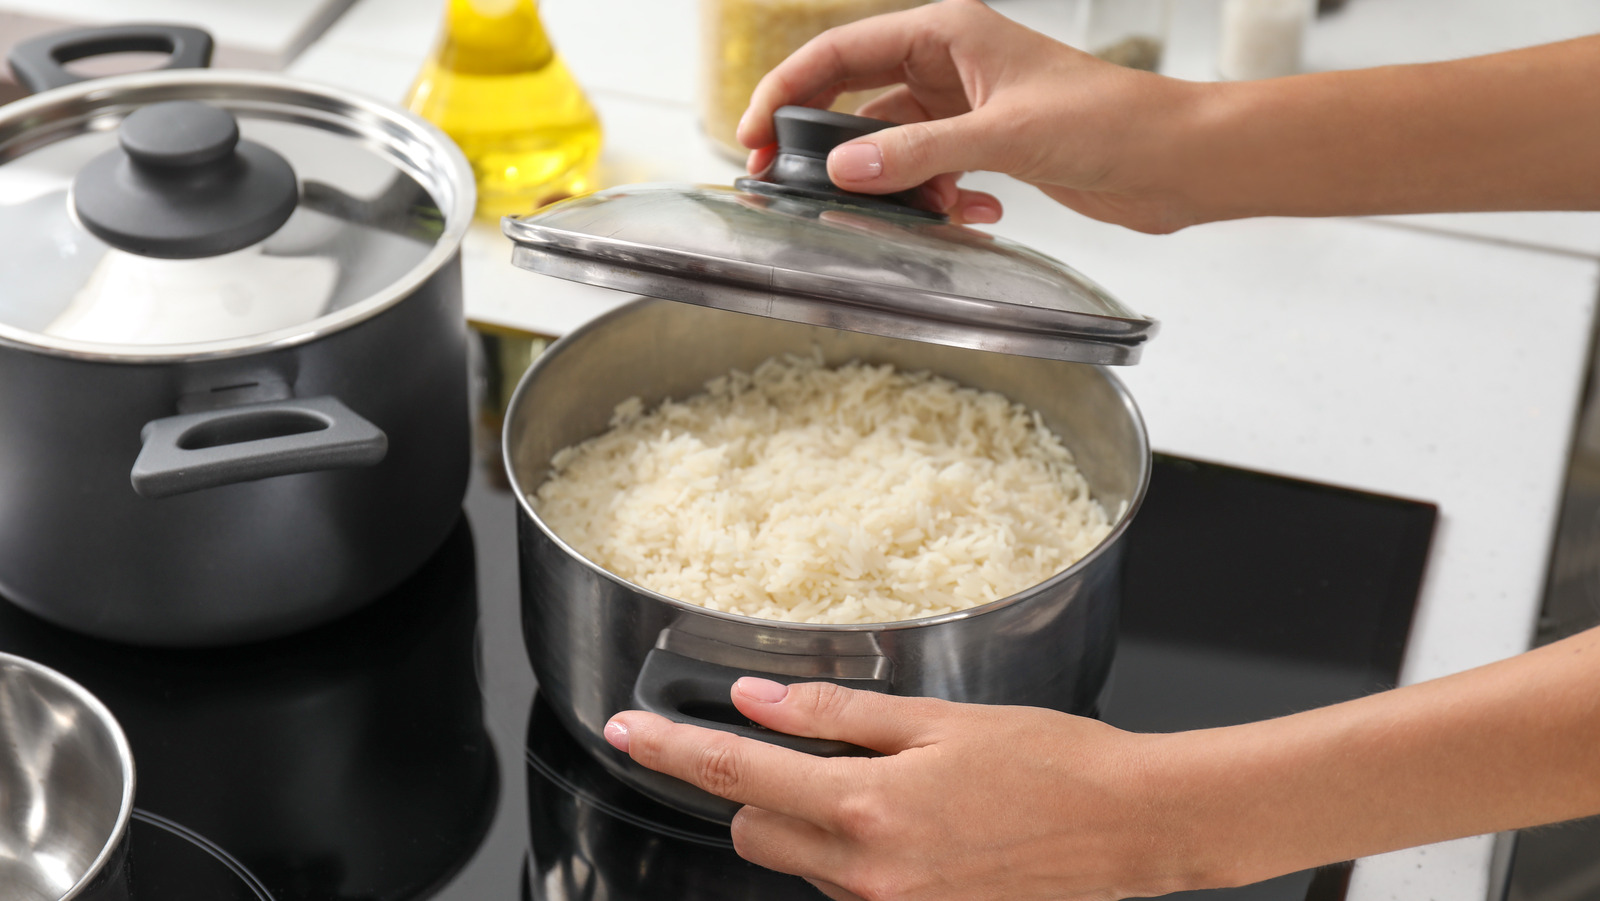 https://www.mashed.com/img/gallery/how-to-stop-your-pot-of-rice-from-bubbling-over/l-intro-1635797405.jpg